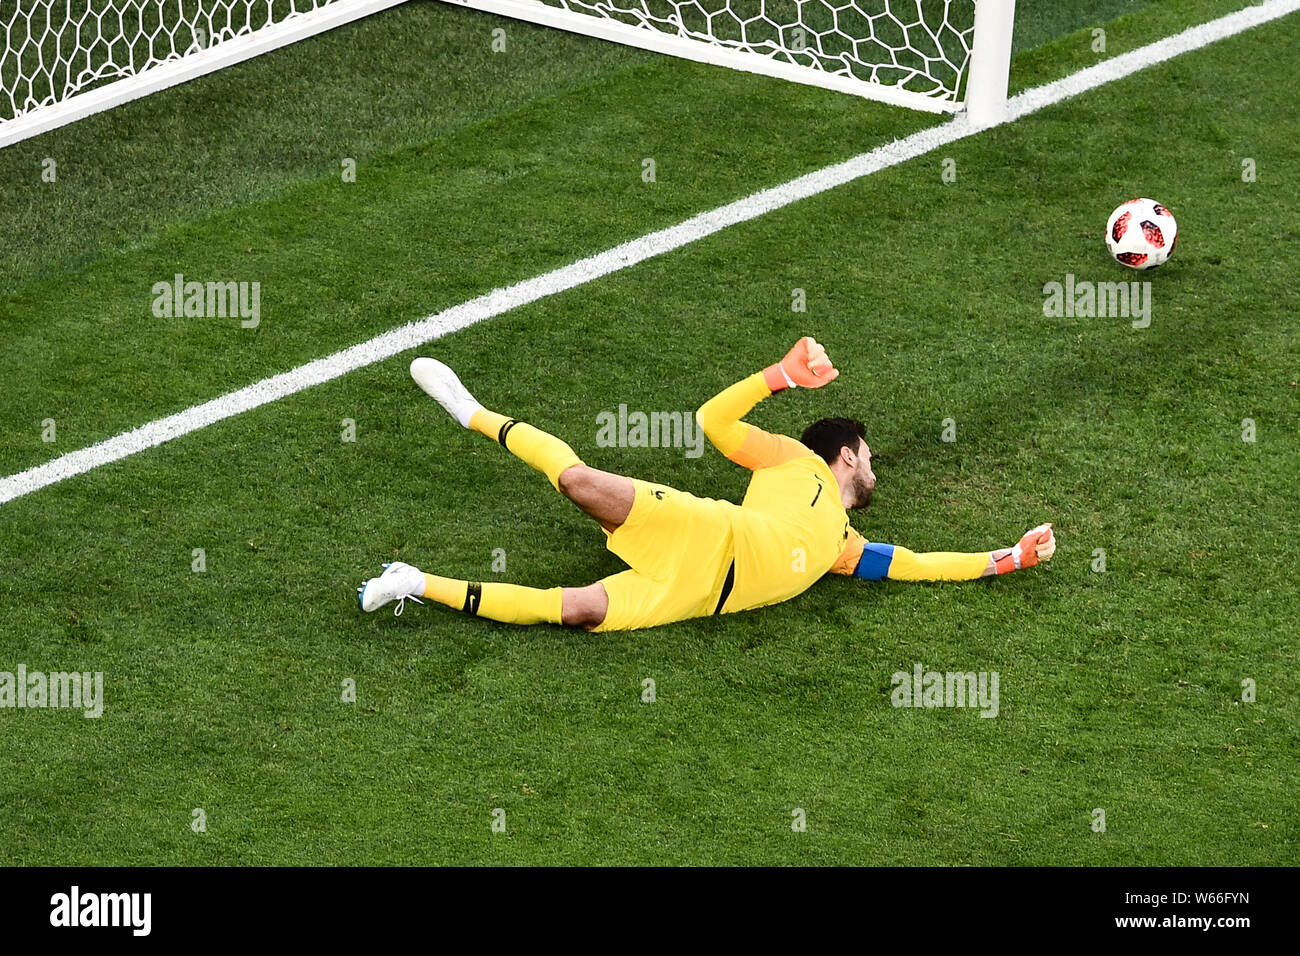 Goalkeeper Hugo Lloris of France tries to save a shot by Belgium in their semifinal match during the 2018 FIFA World Cup in Saint Petersburg, Russia, Stock Photo